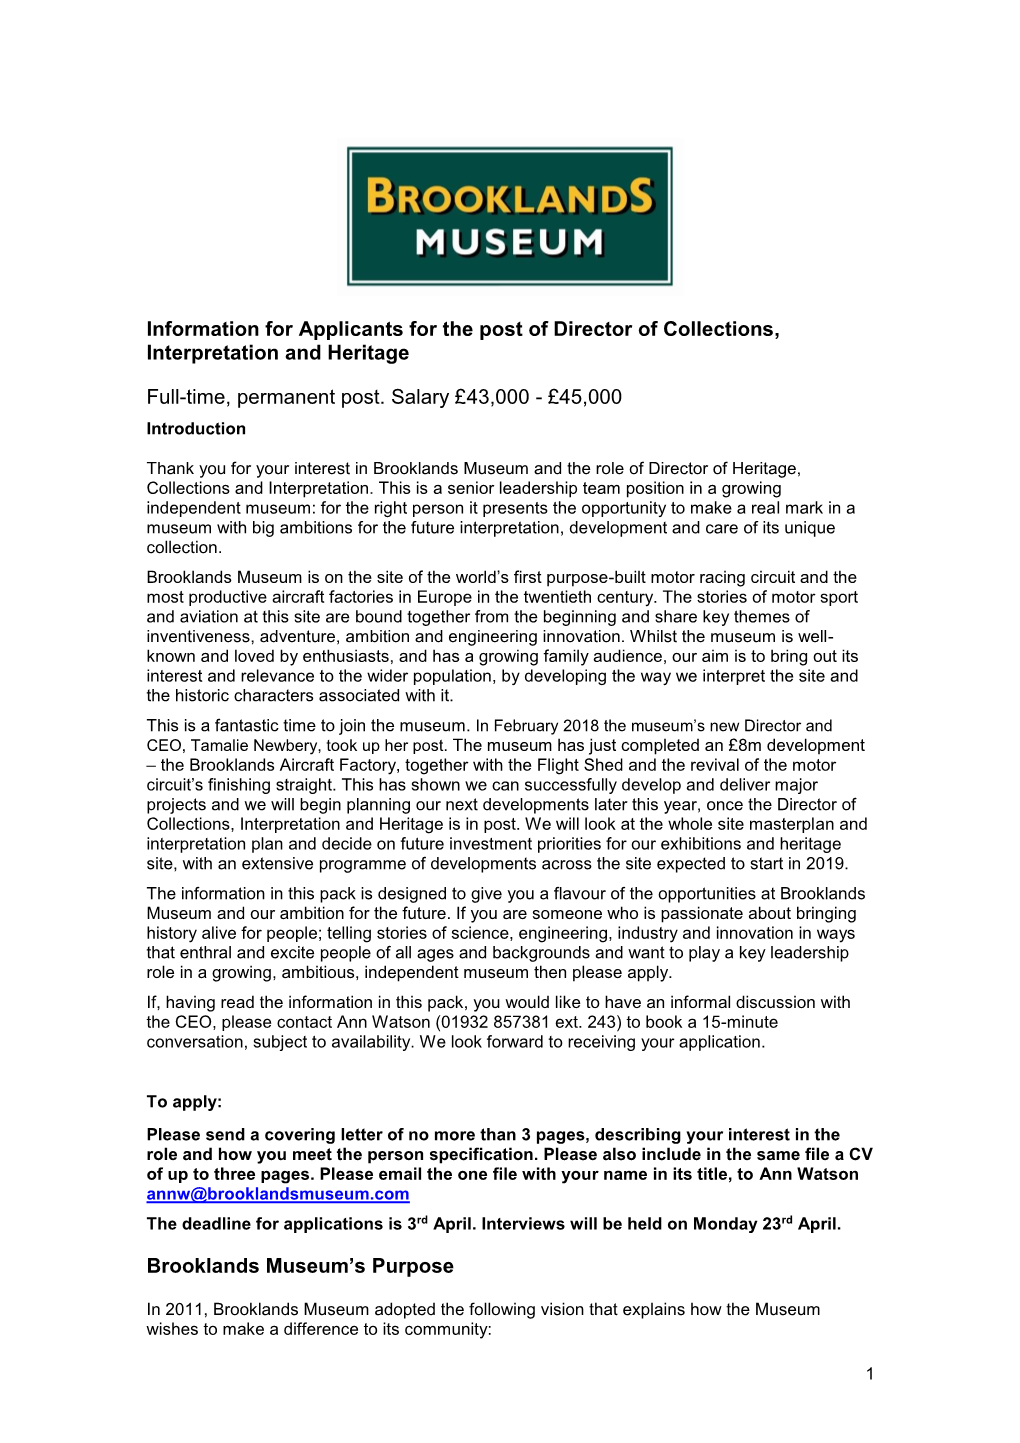 Information for Applicants for the Post of Director of Collections, Interpretation and Heritage